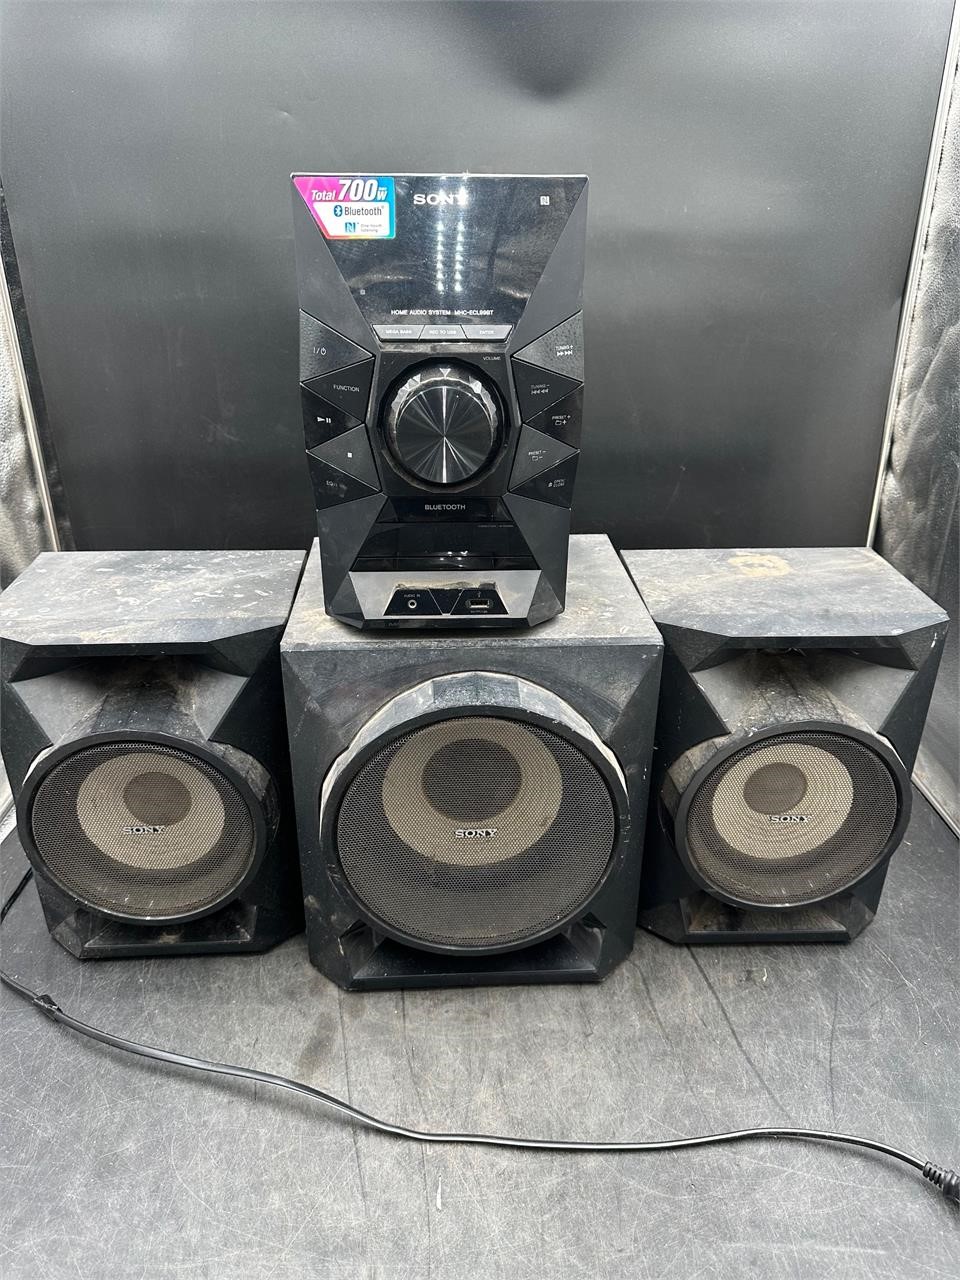 Bluetooth Sony Stereo System w/Speakers- Works